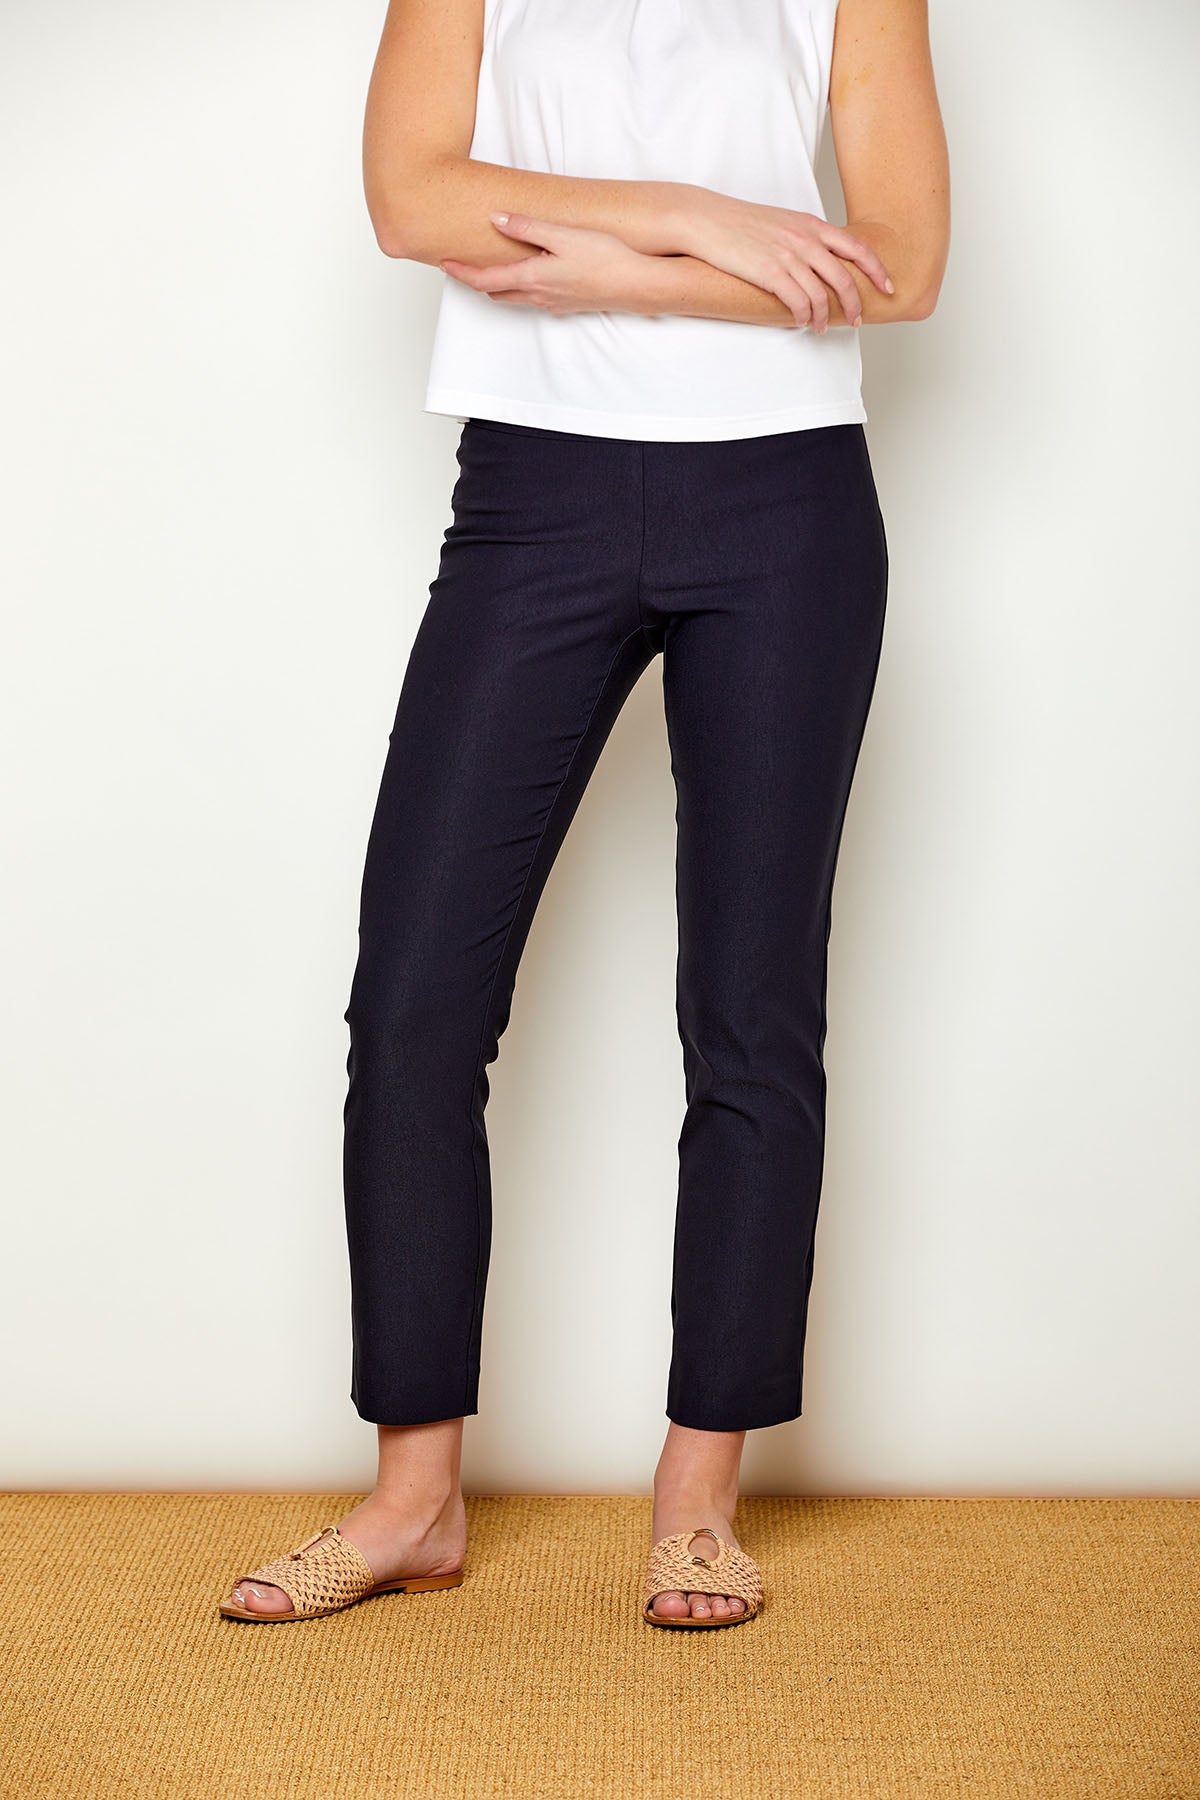 Woman in fitted navy colored pants